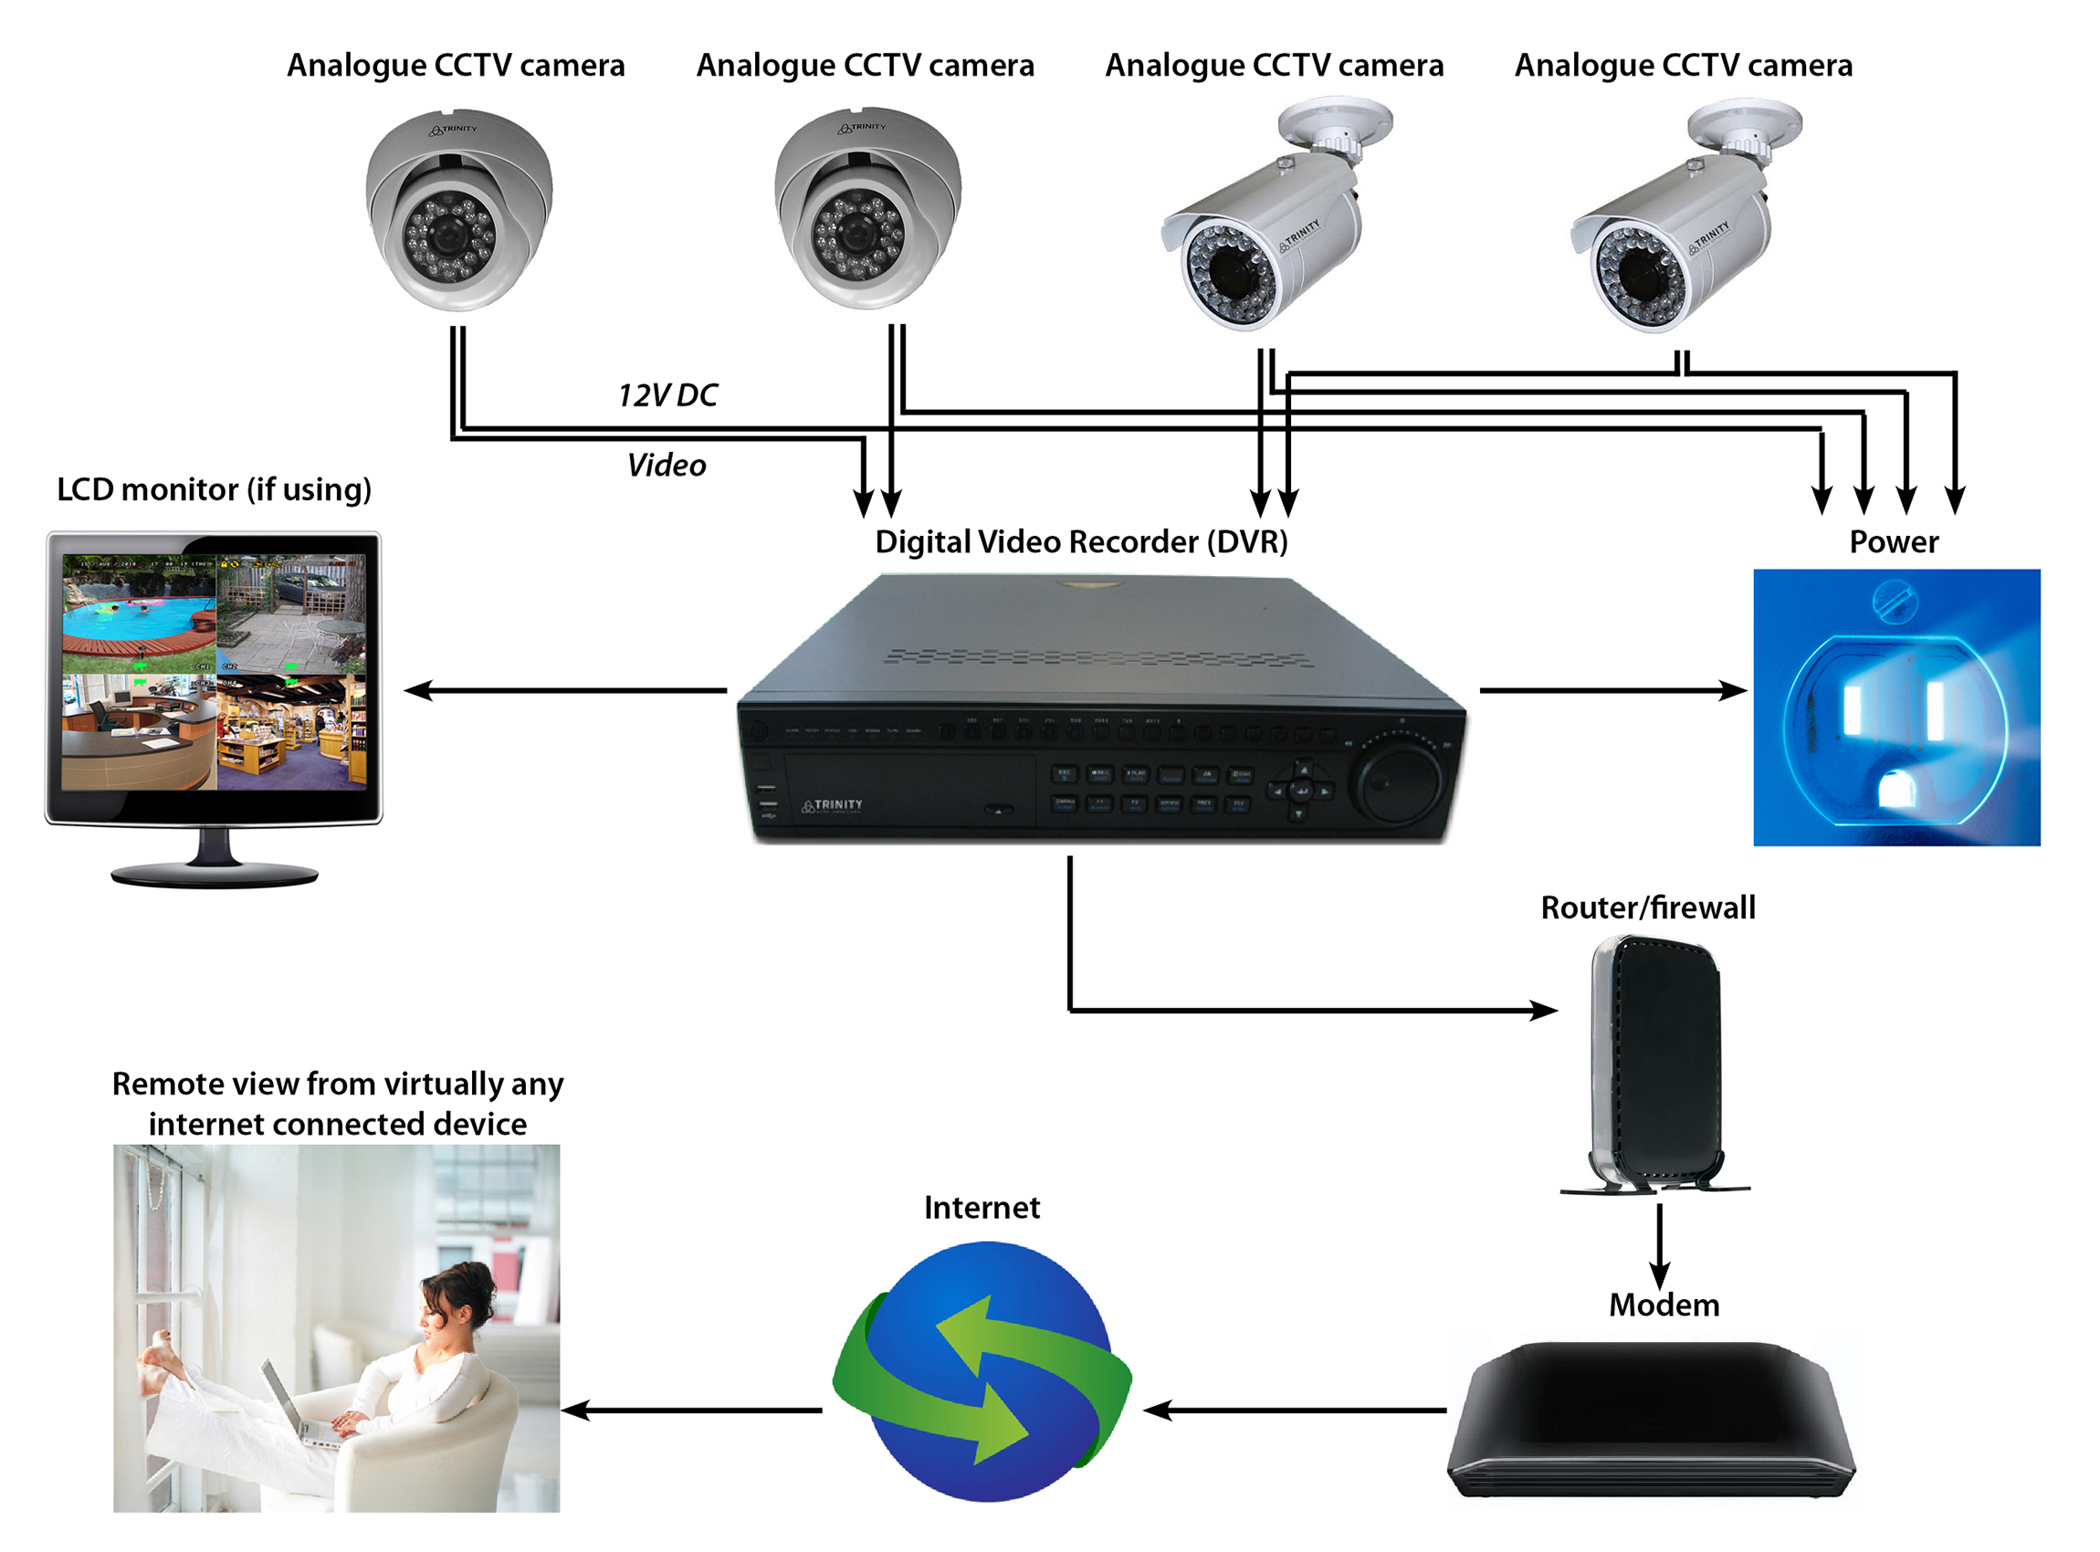 CCTV system is 